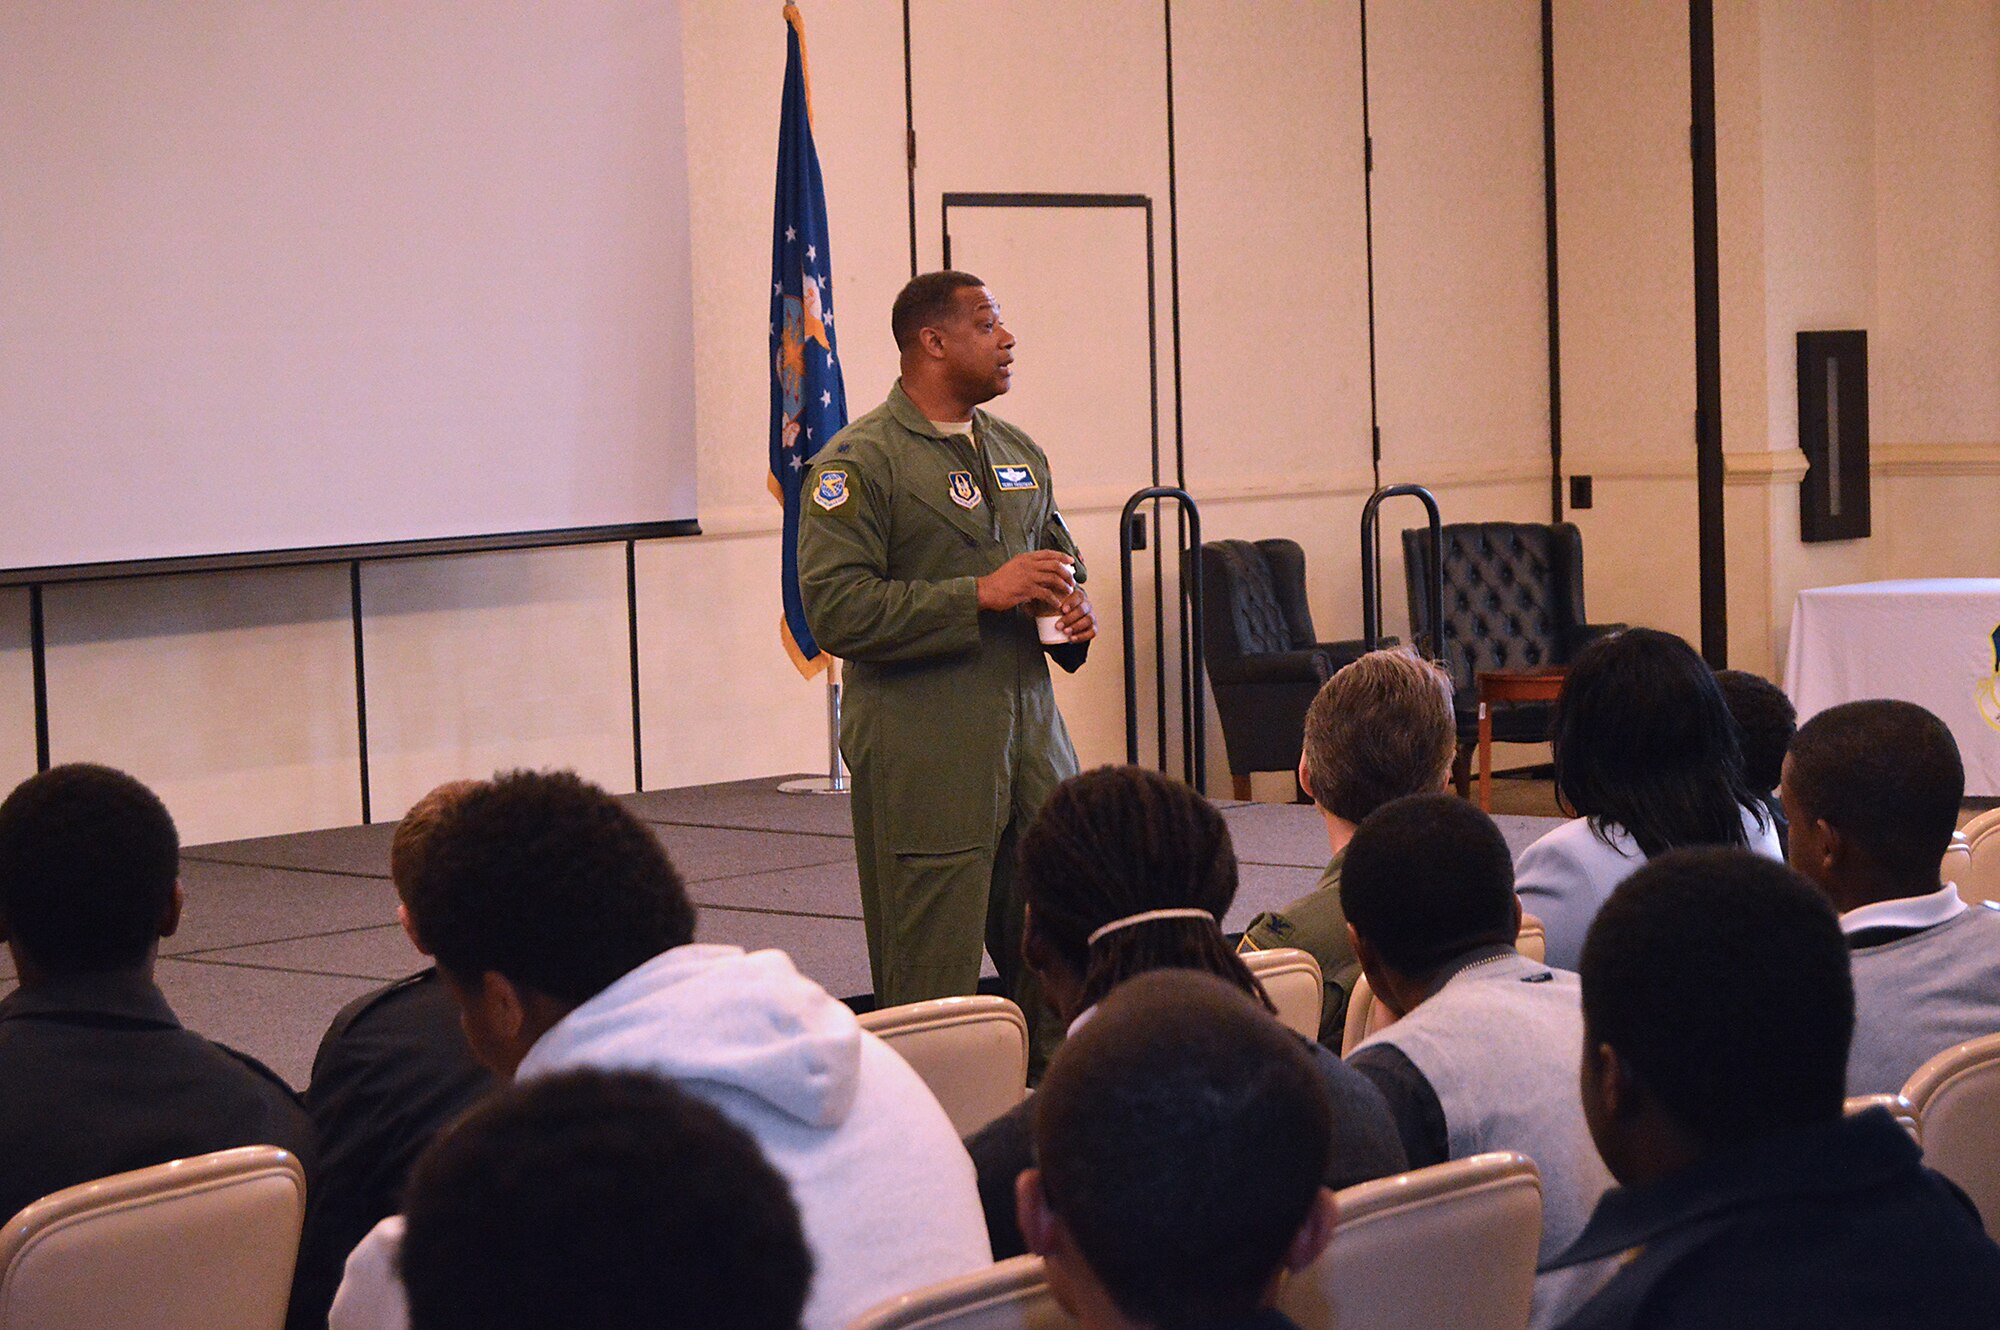 Guest speaker Lt. Col. Terry Troutman, Air Force Reserve Command Mobility Combat Support officer, speaks to students during the Joint Base Charleston Tuskegee Airmen Career Day Feb. 25, 2016. The 315th Airlift Wing's first Tuskegee Airmen Career Day drew  over 130 local teenage boys to Joint Base Charleston, S.C. to learn about careers in aviation. The event also celebrated the story of the first black pilots in the American military – the Tuskegee Airmen. (courtesy photo by Senior Master Sgt. Eric Keys)